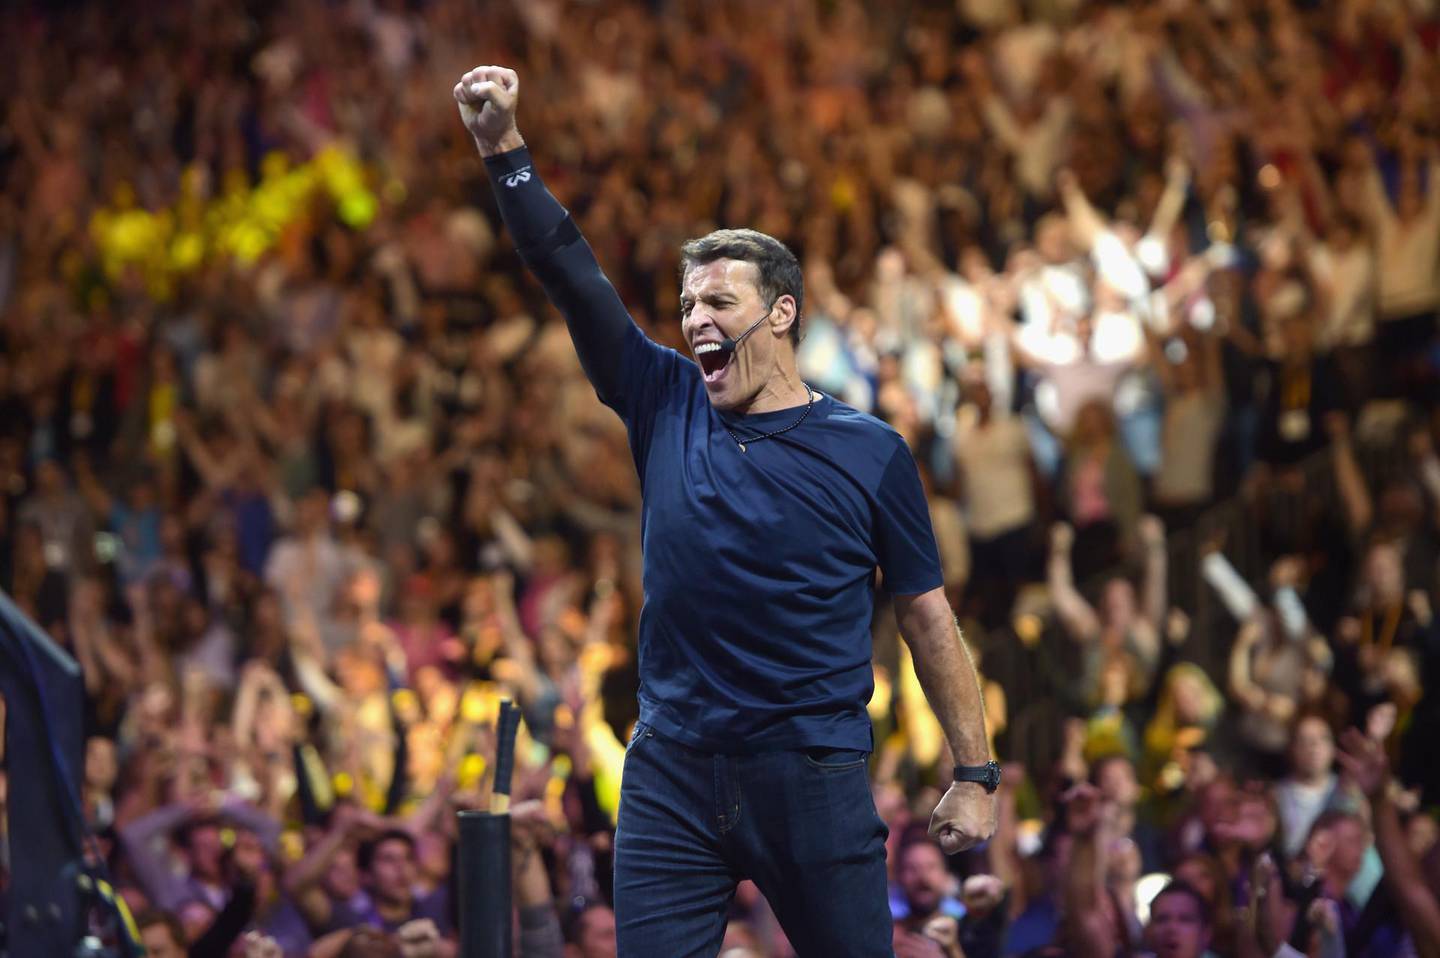 NEWARK, NJ - JULY 22:  Tony Robbins speaks on stage during Tony Robbins LIVE: Unleash the Power Within at Prudential Center on July 22, 2017 in Newark, New Jersey.  (Photo by Jason Kempin/Getty Images for Robbins Research International)